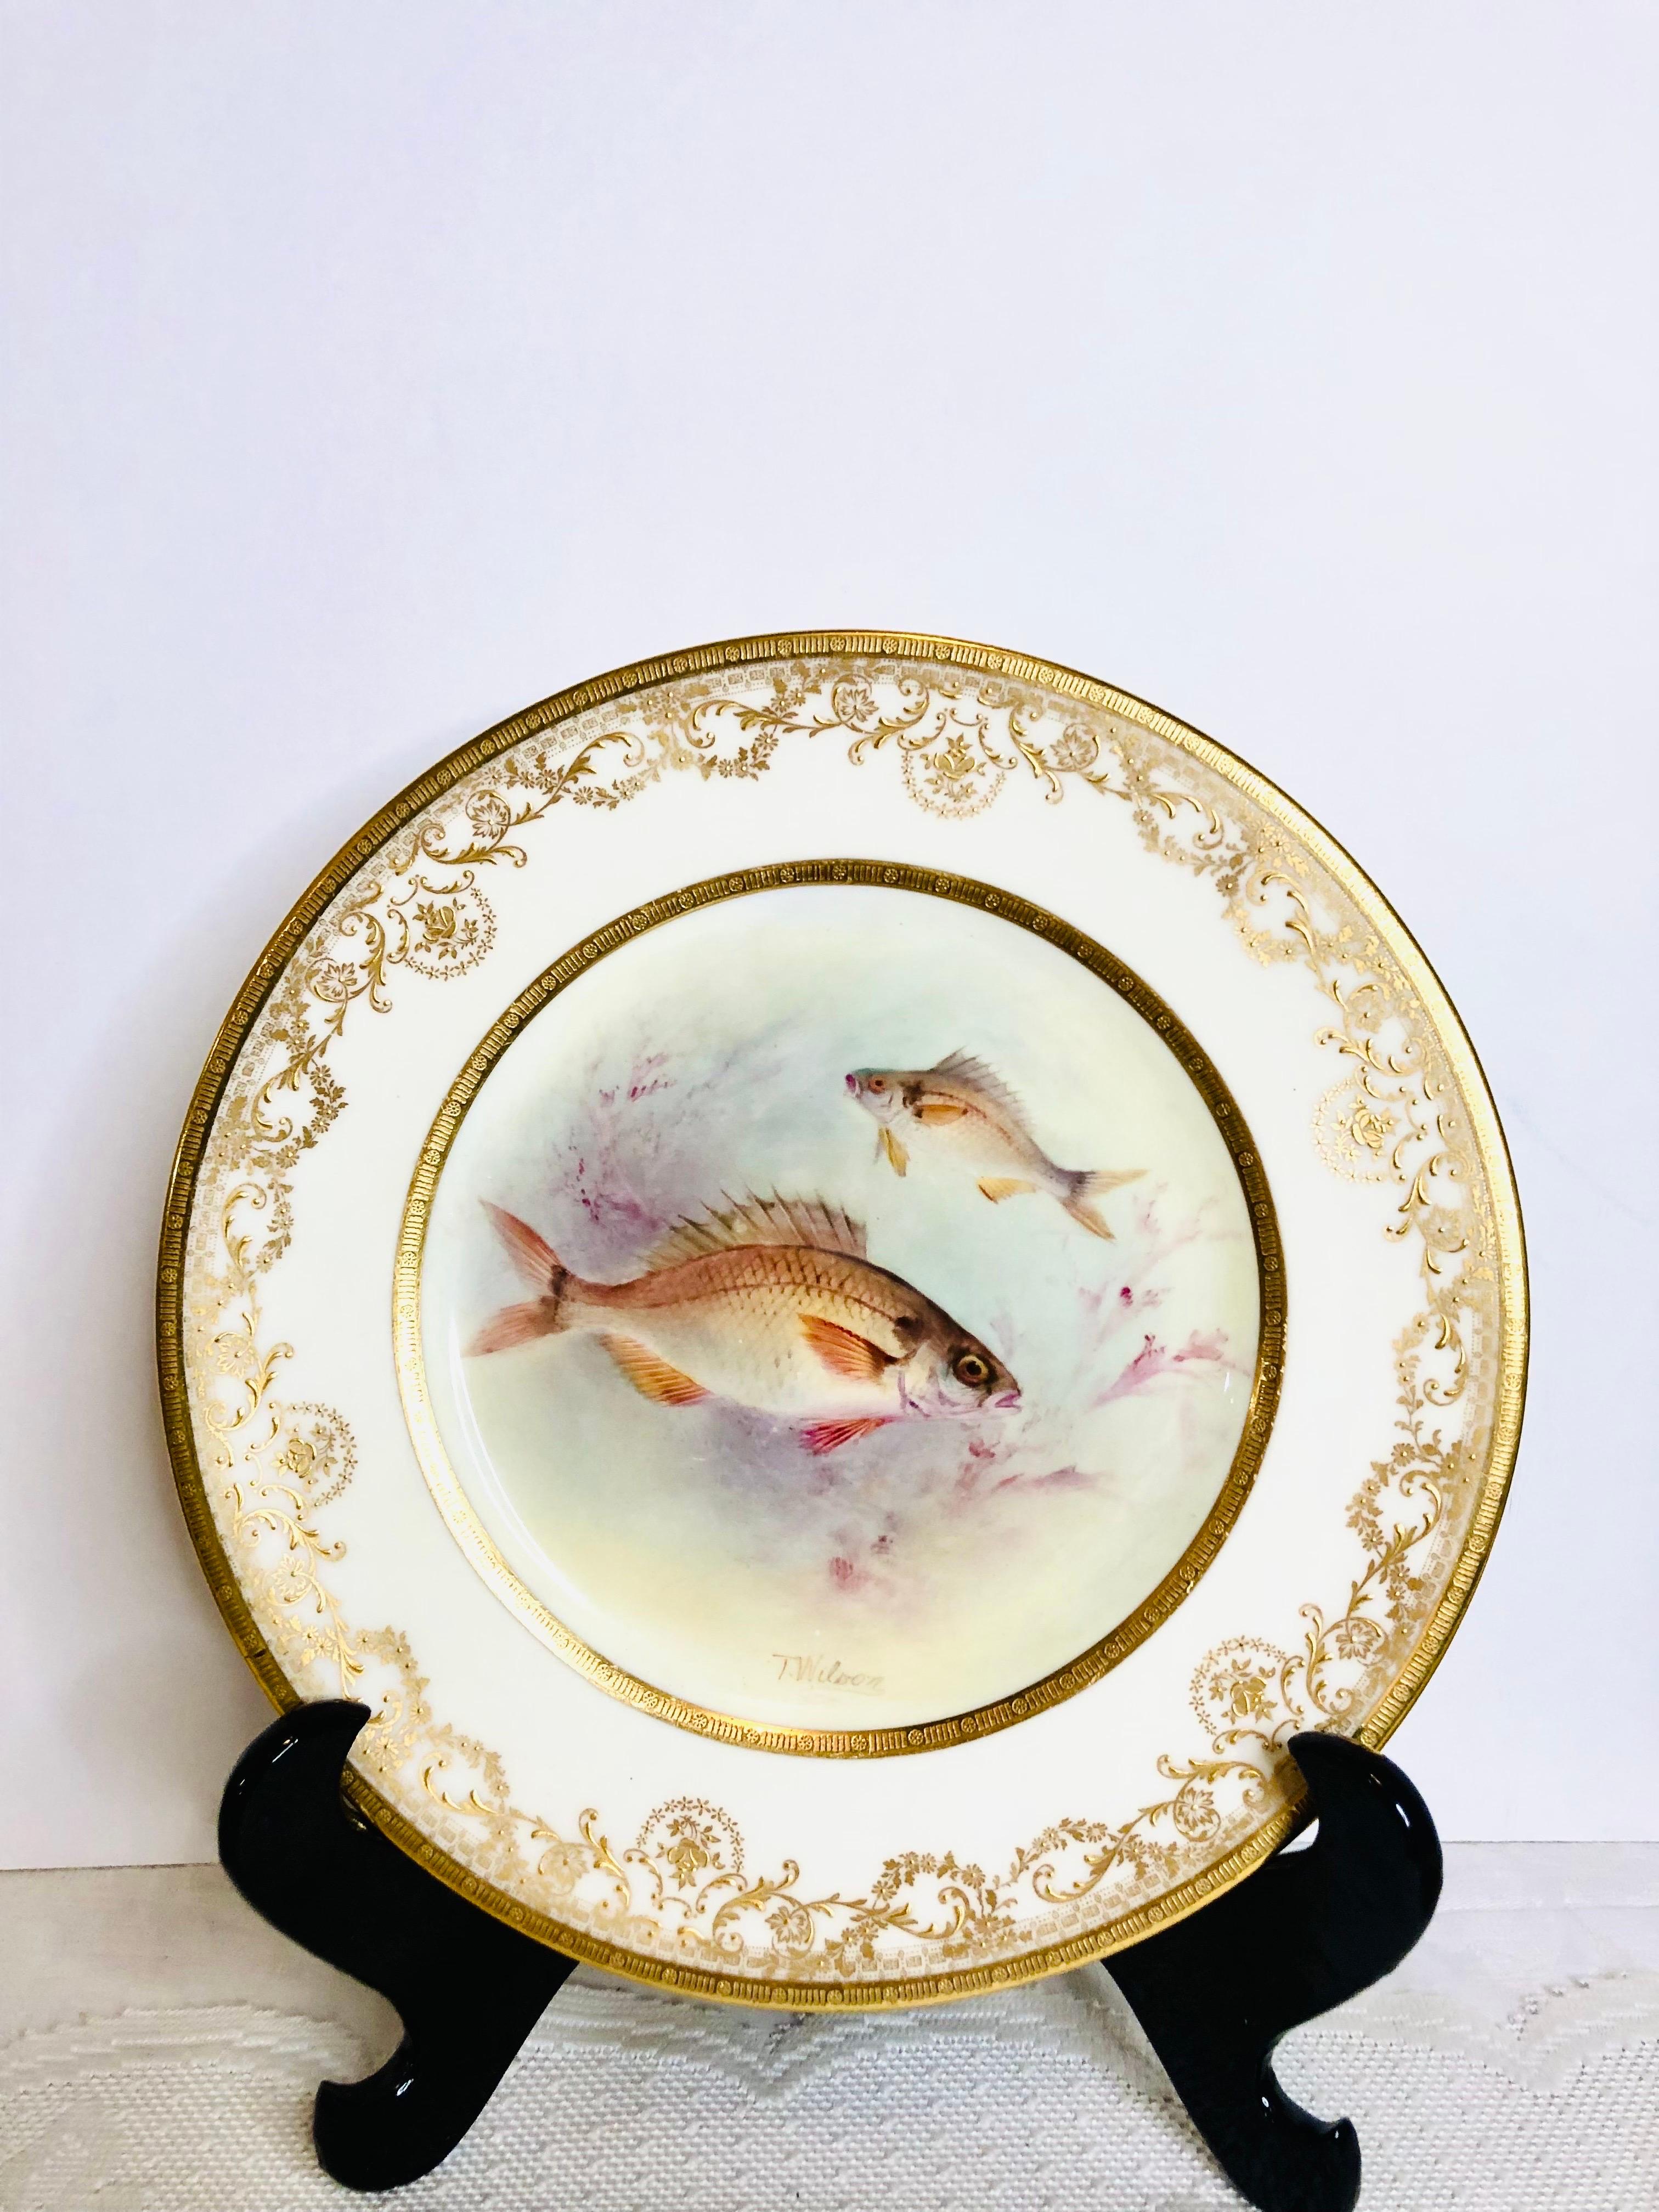 Porcelain Set of 12 Royal Doulton Fish Plates Each Hand Painted with Different Fish 